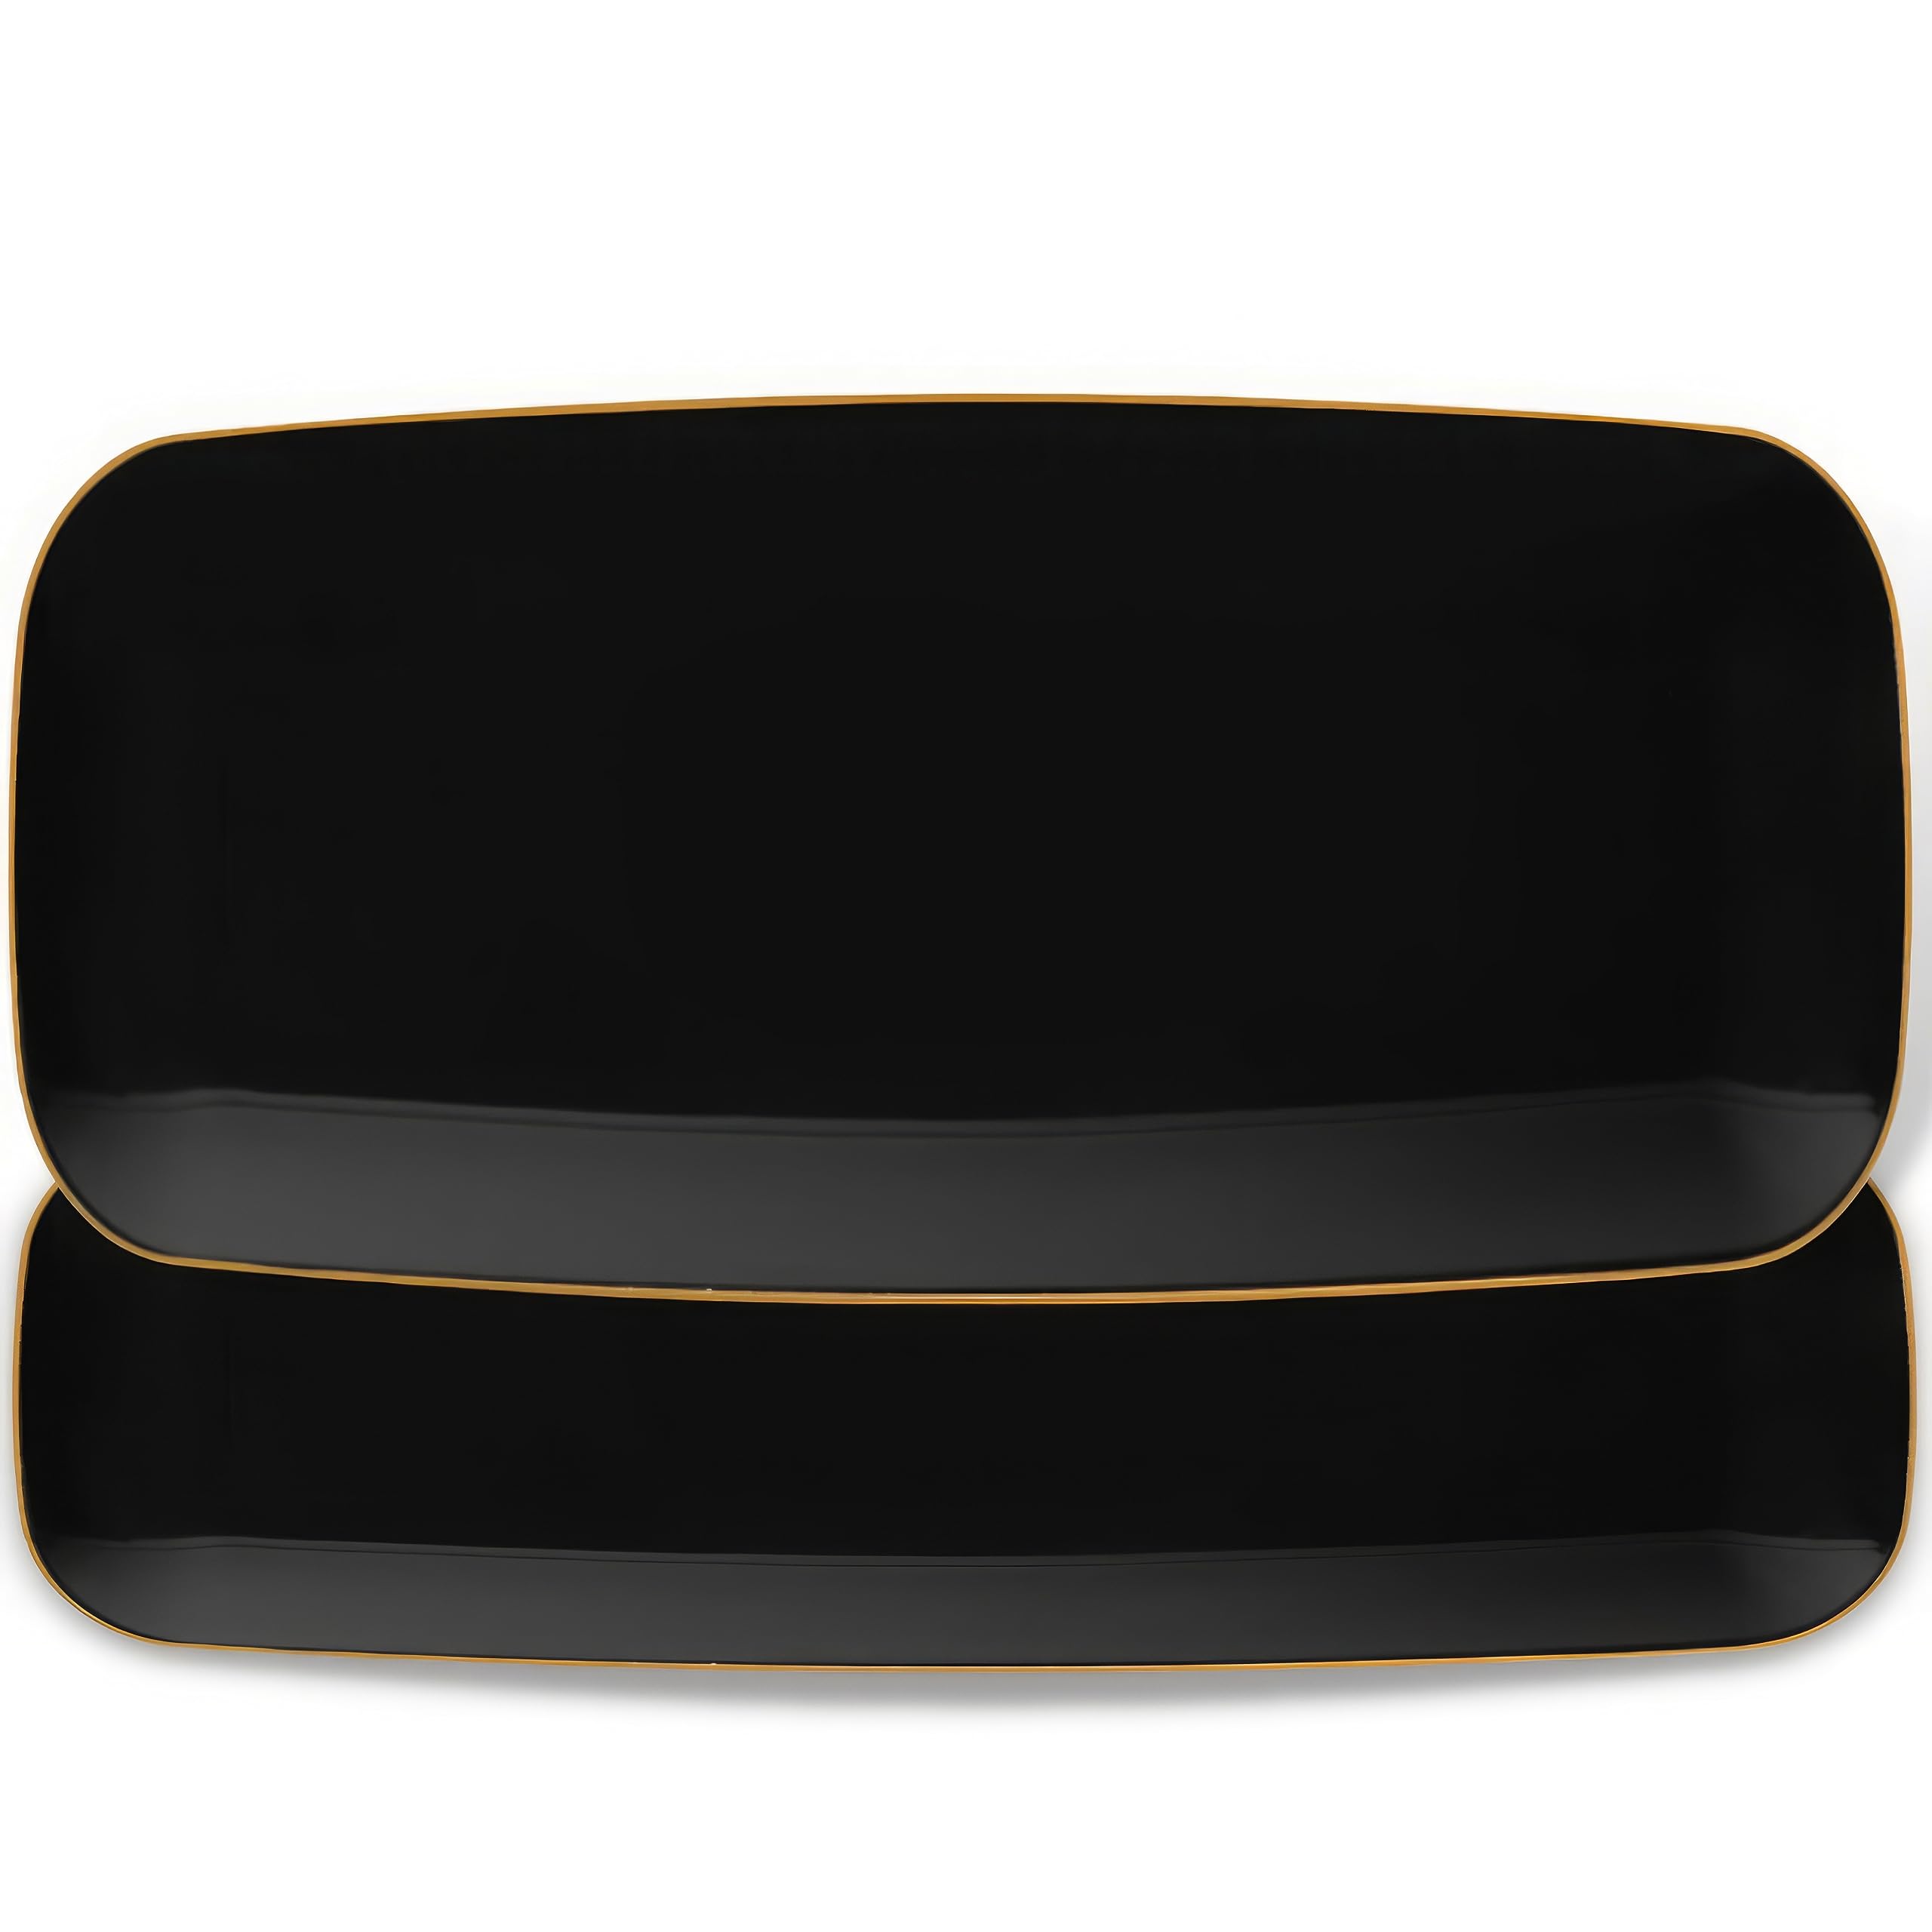 Organic Rectangle Black with Gold Rim Tray - 10.6